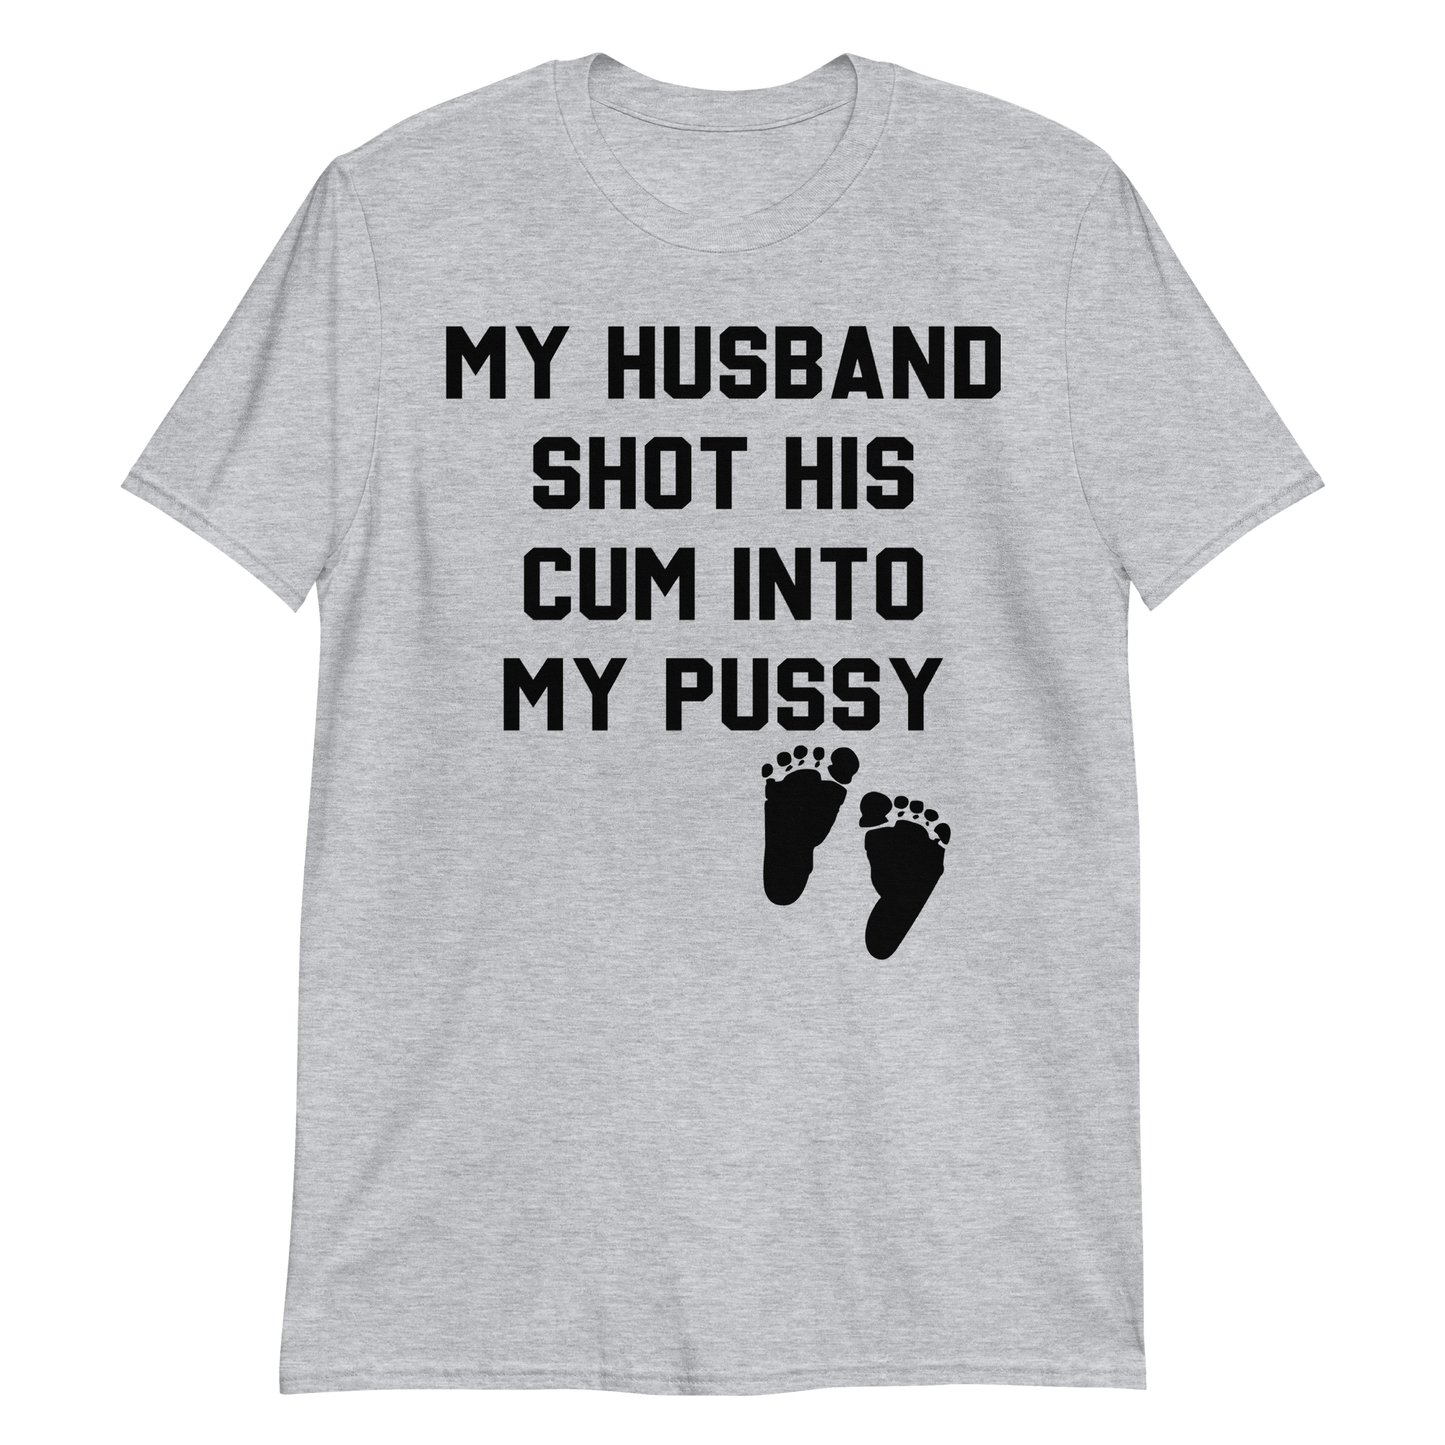 My Husband Shot His Cum Into My Pussy.